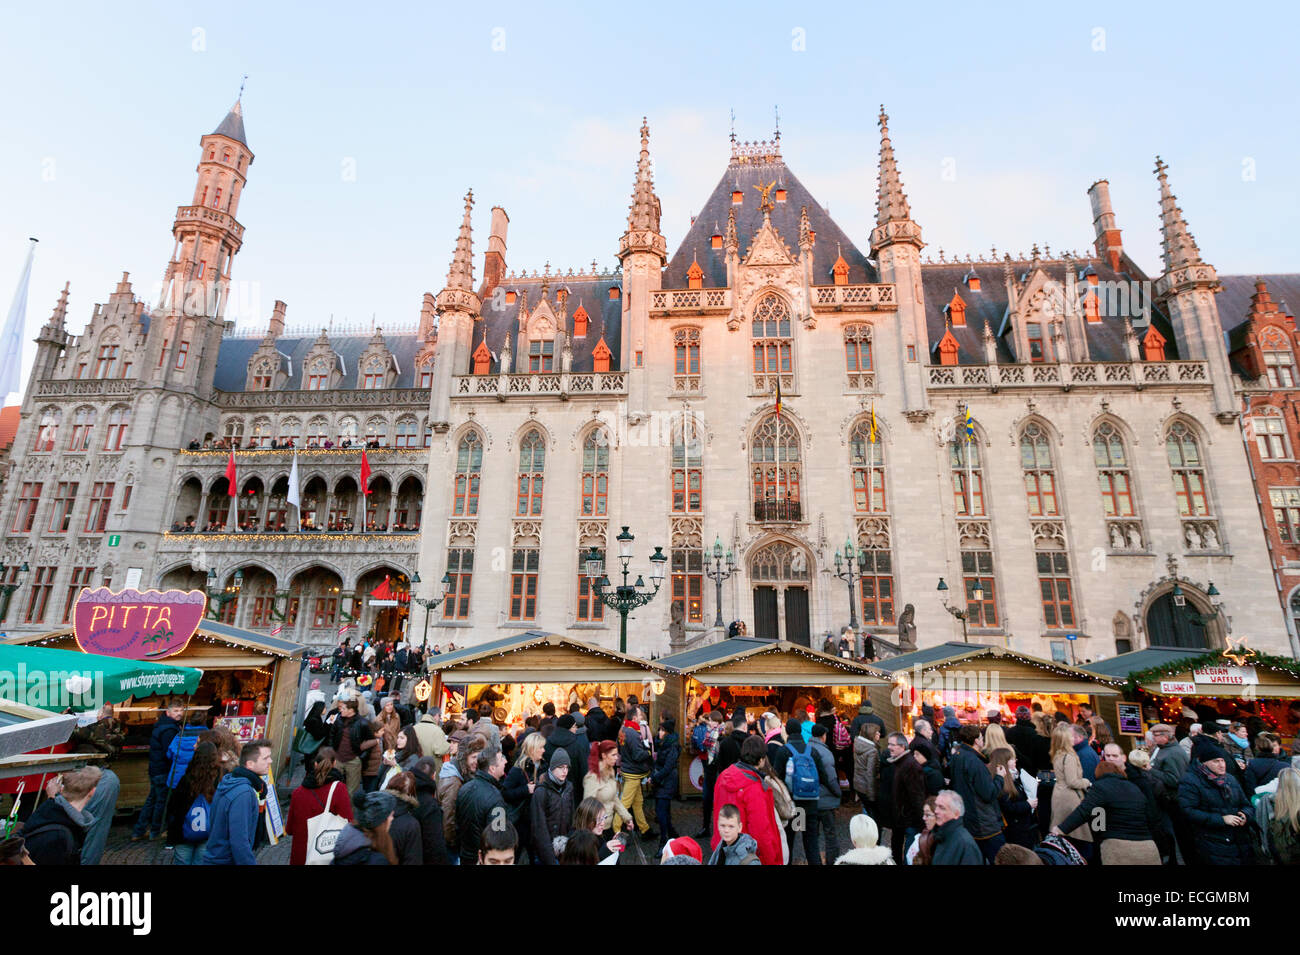 People and stalls at the Christmas Market, Bruges, Belgium Stock Photo